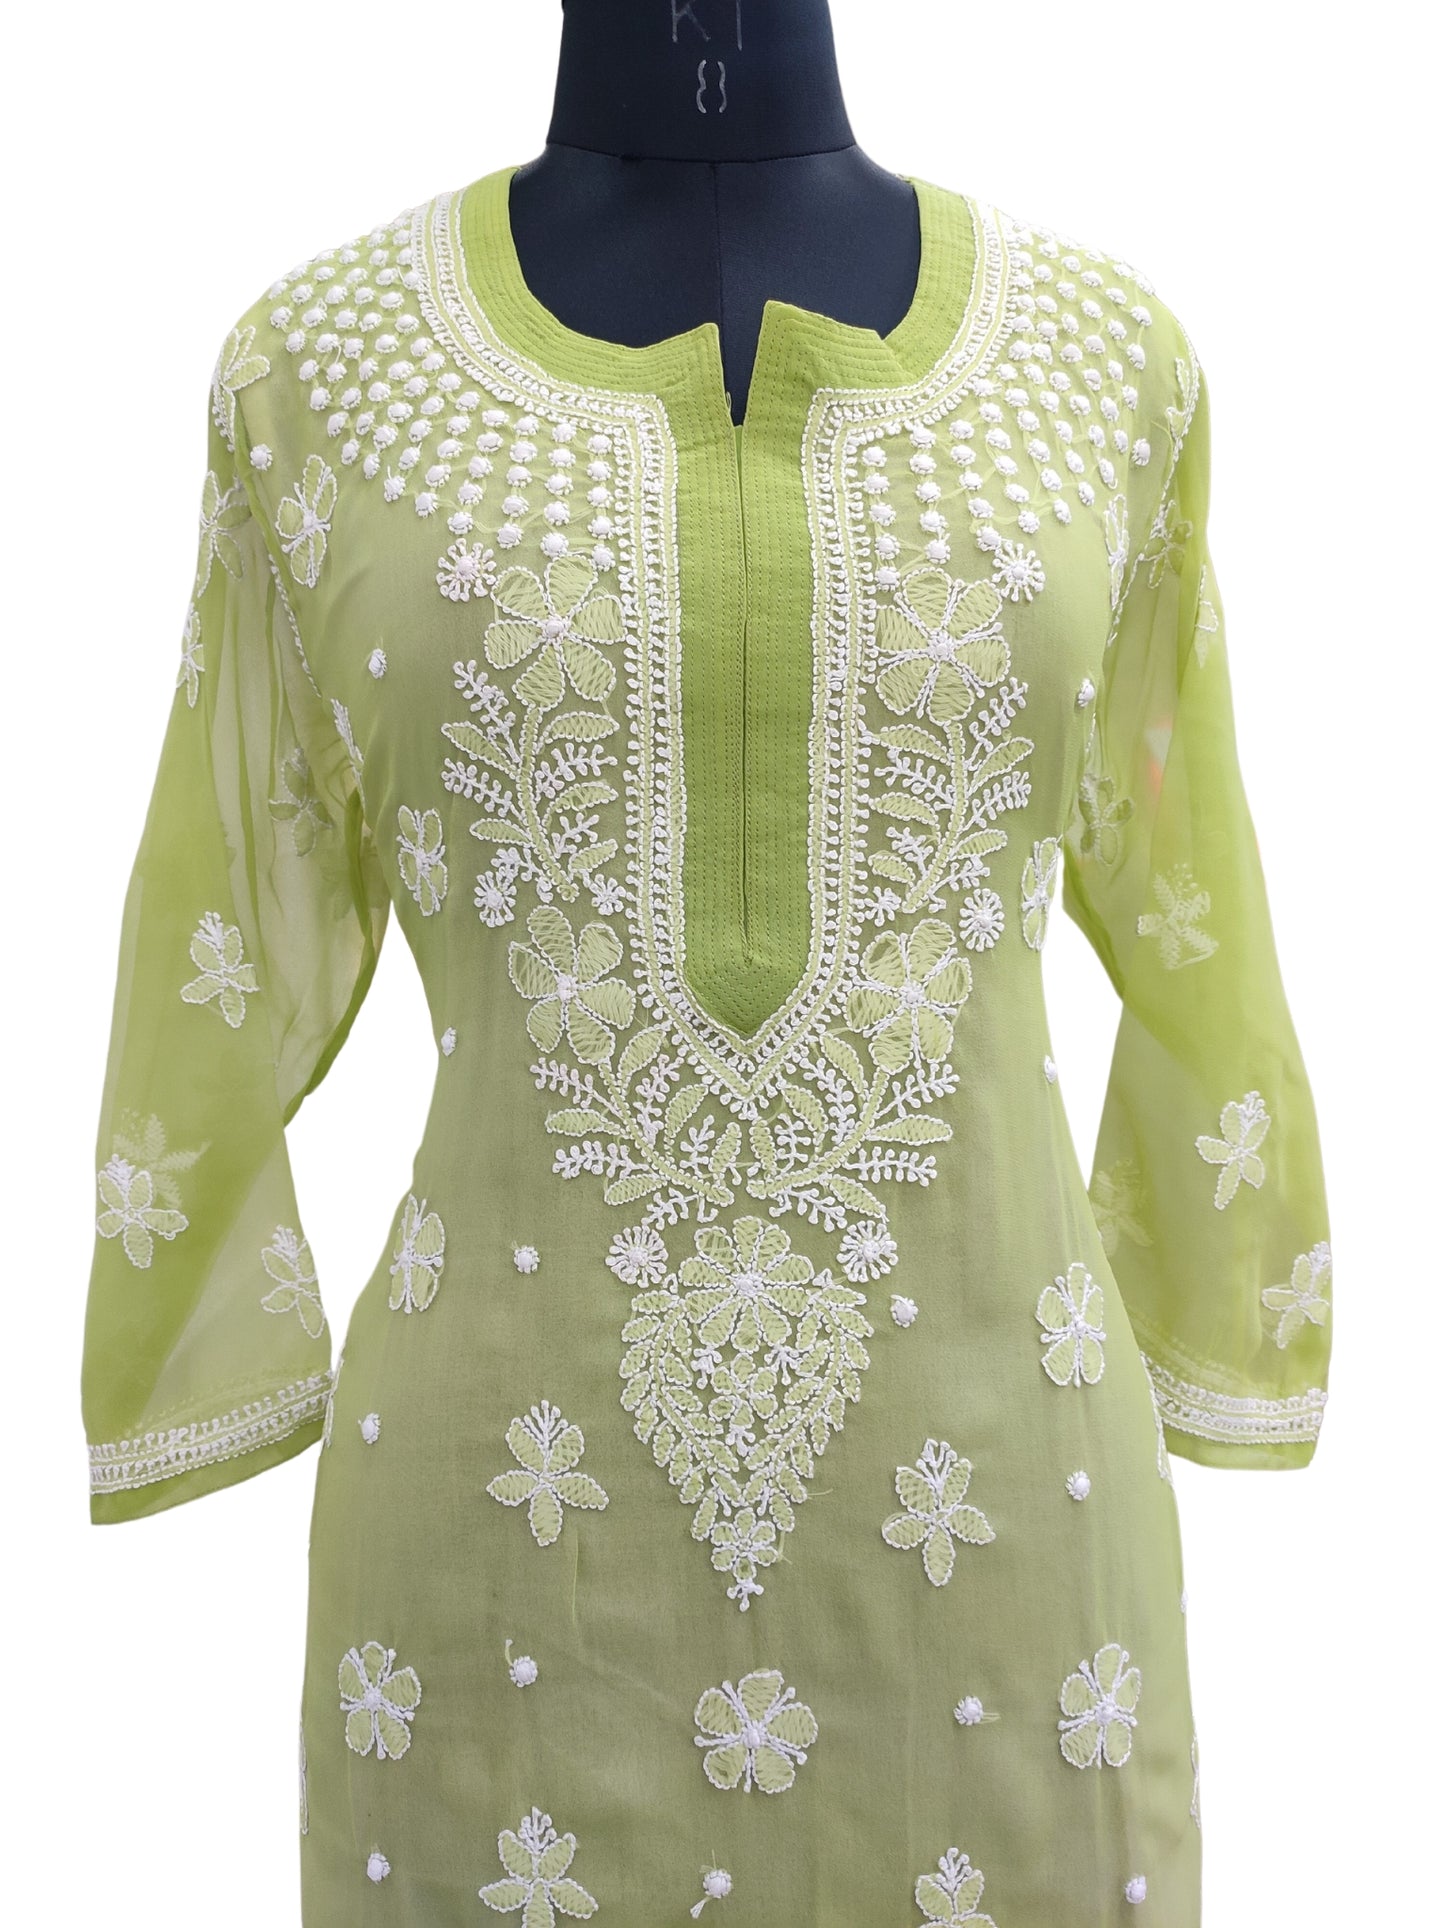 Trendy tips to accessorize your Lucknowi Kurti